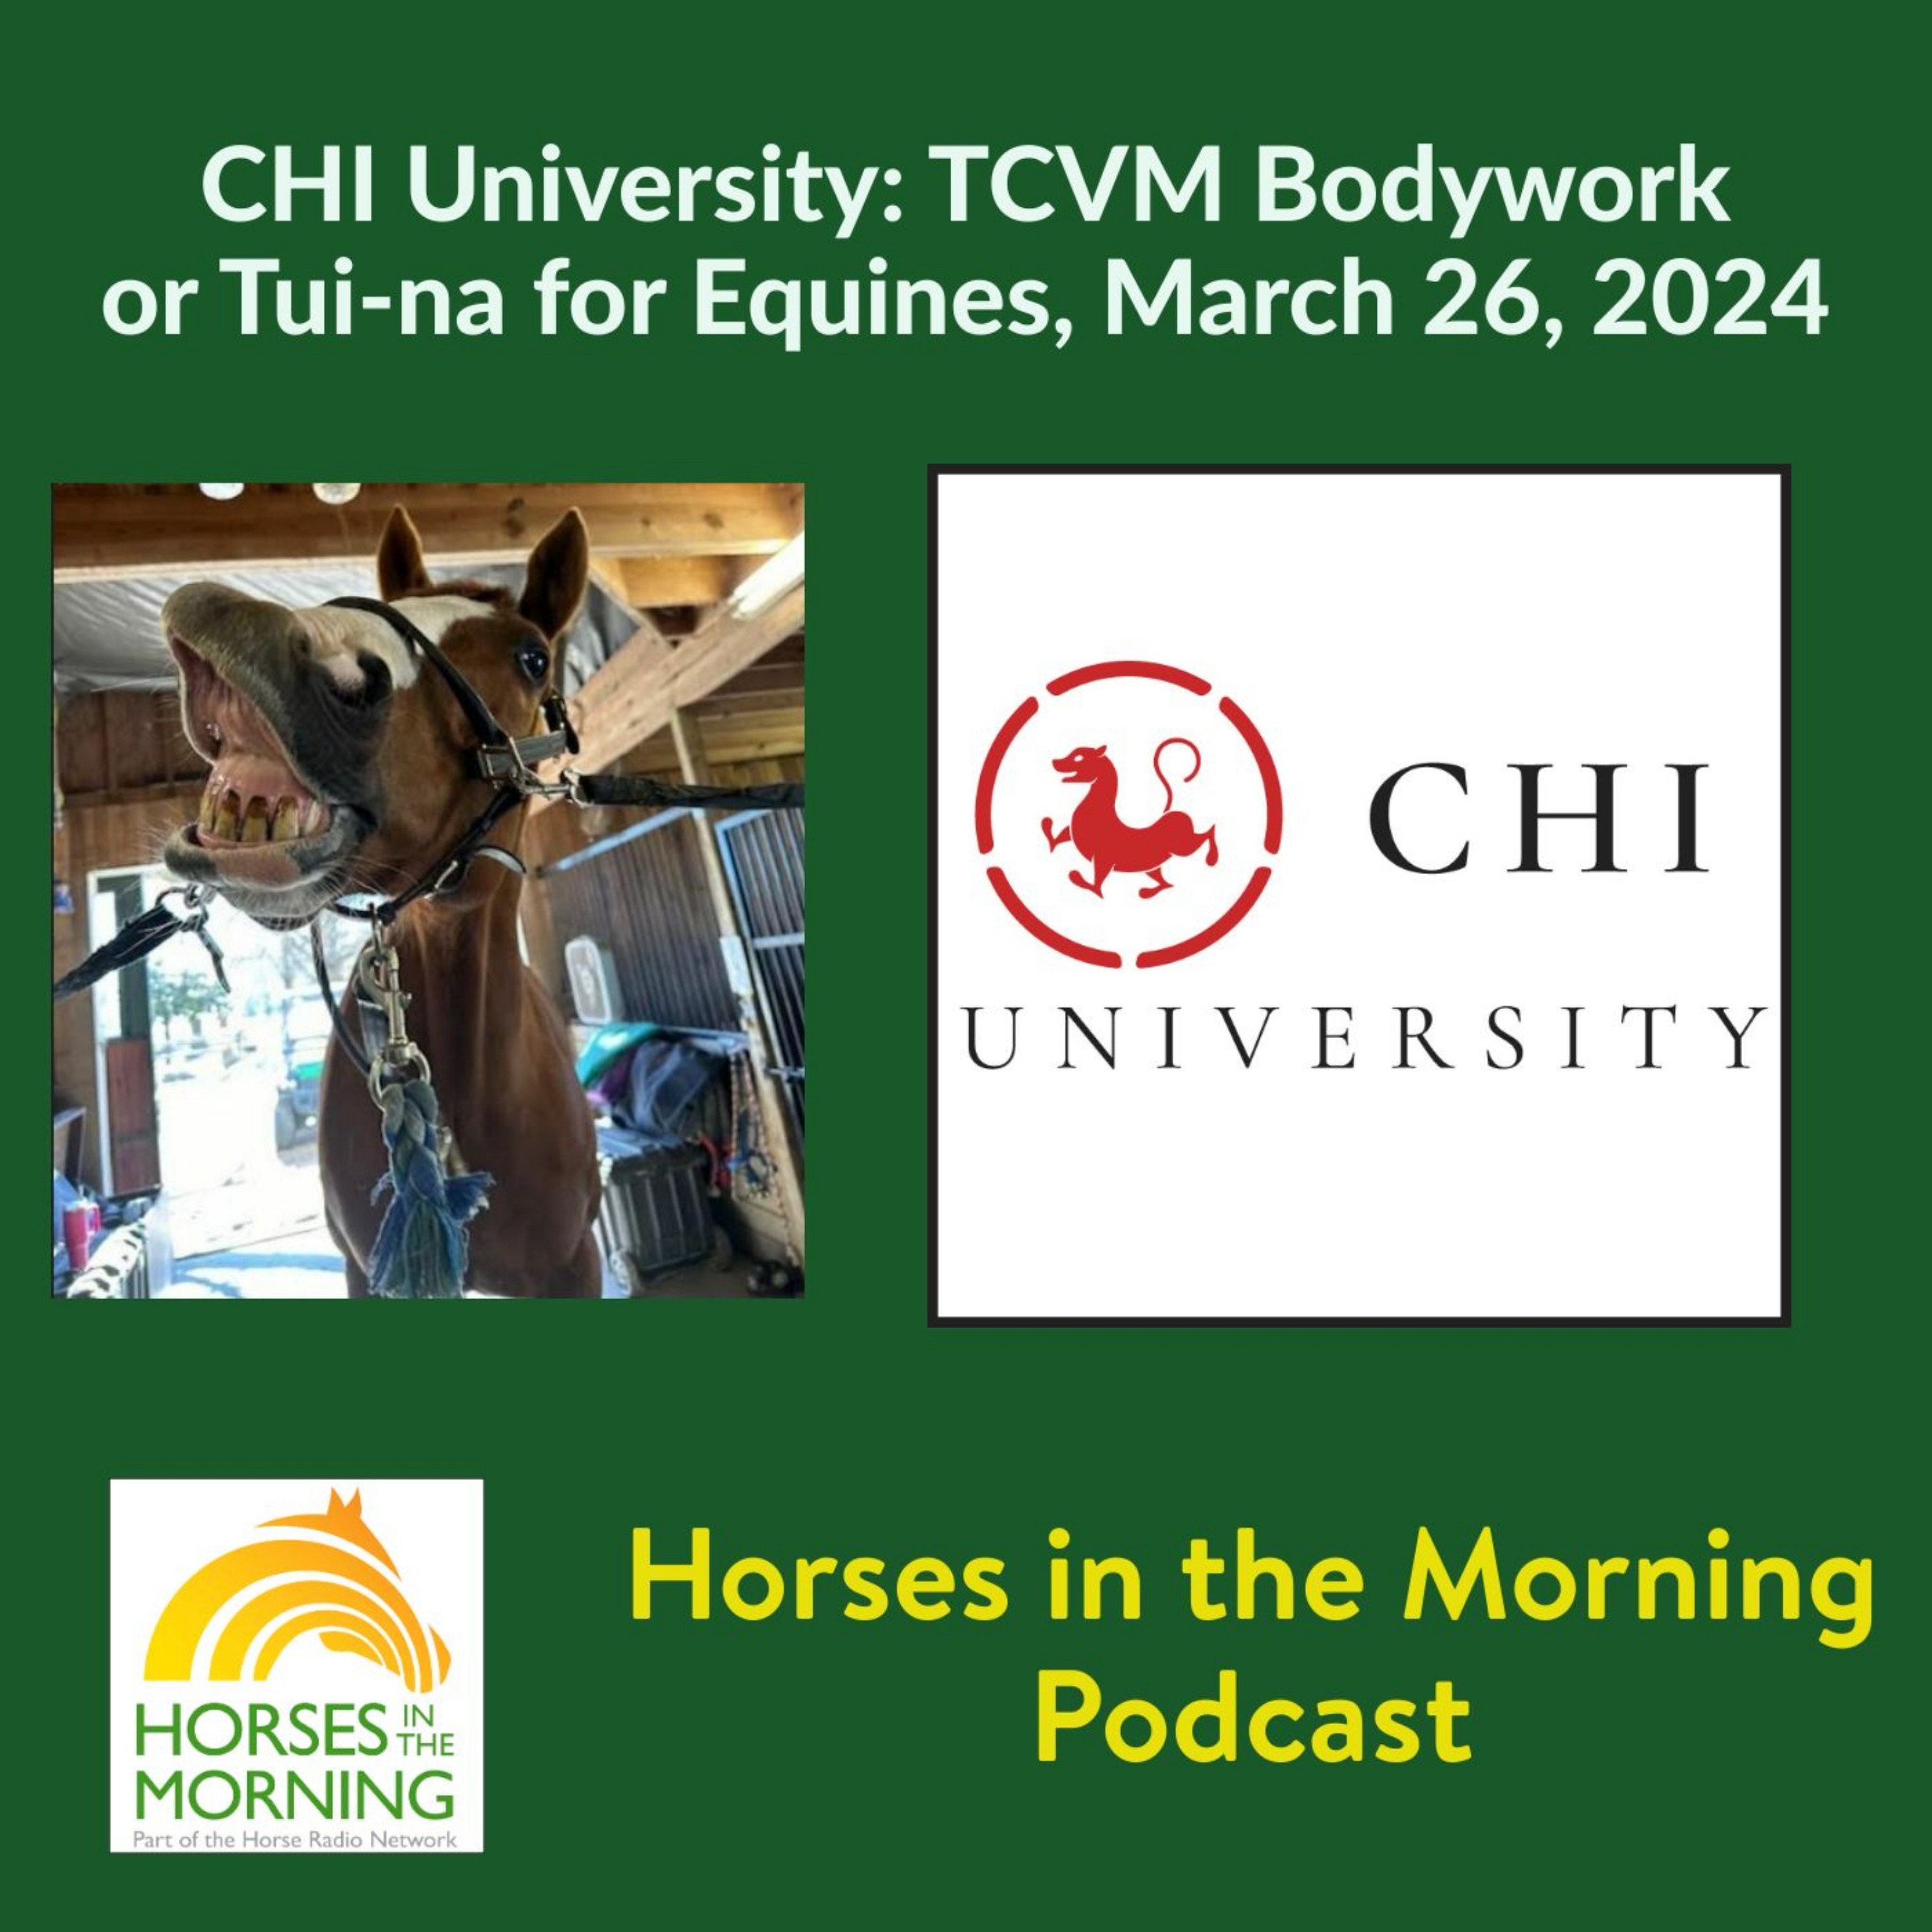 CHI University: TCVM Tui-na or Bodywork for Equines, for March 26, 2024 - HORSES IN THE MORNING